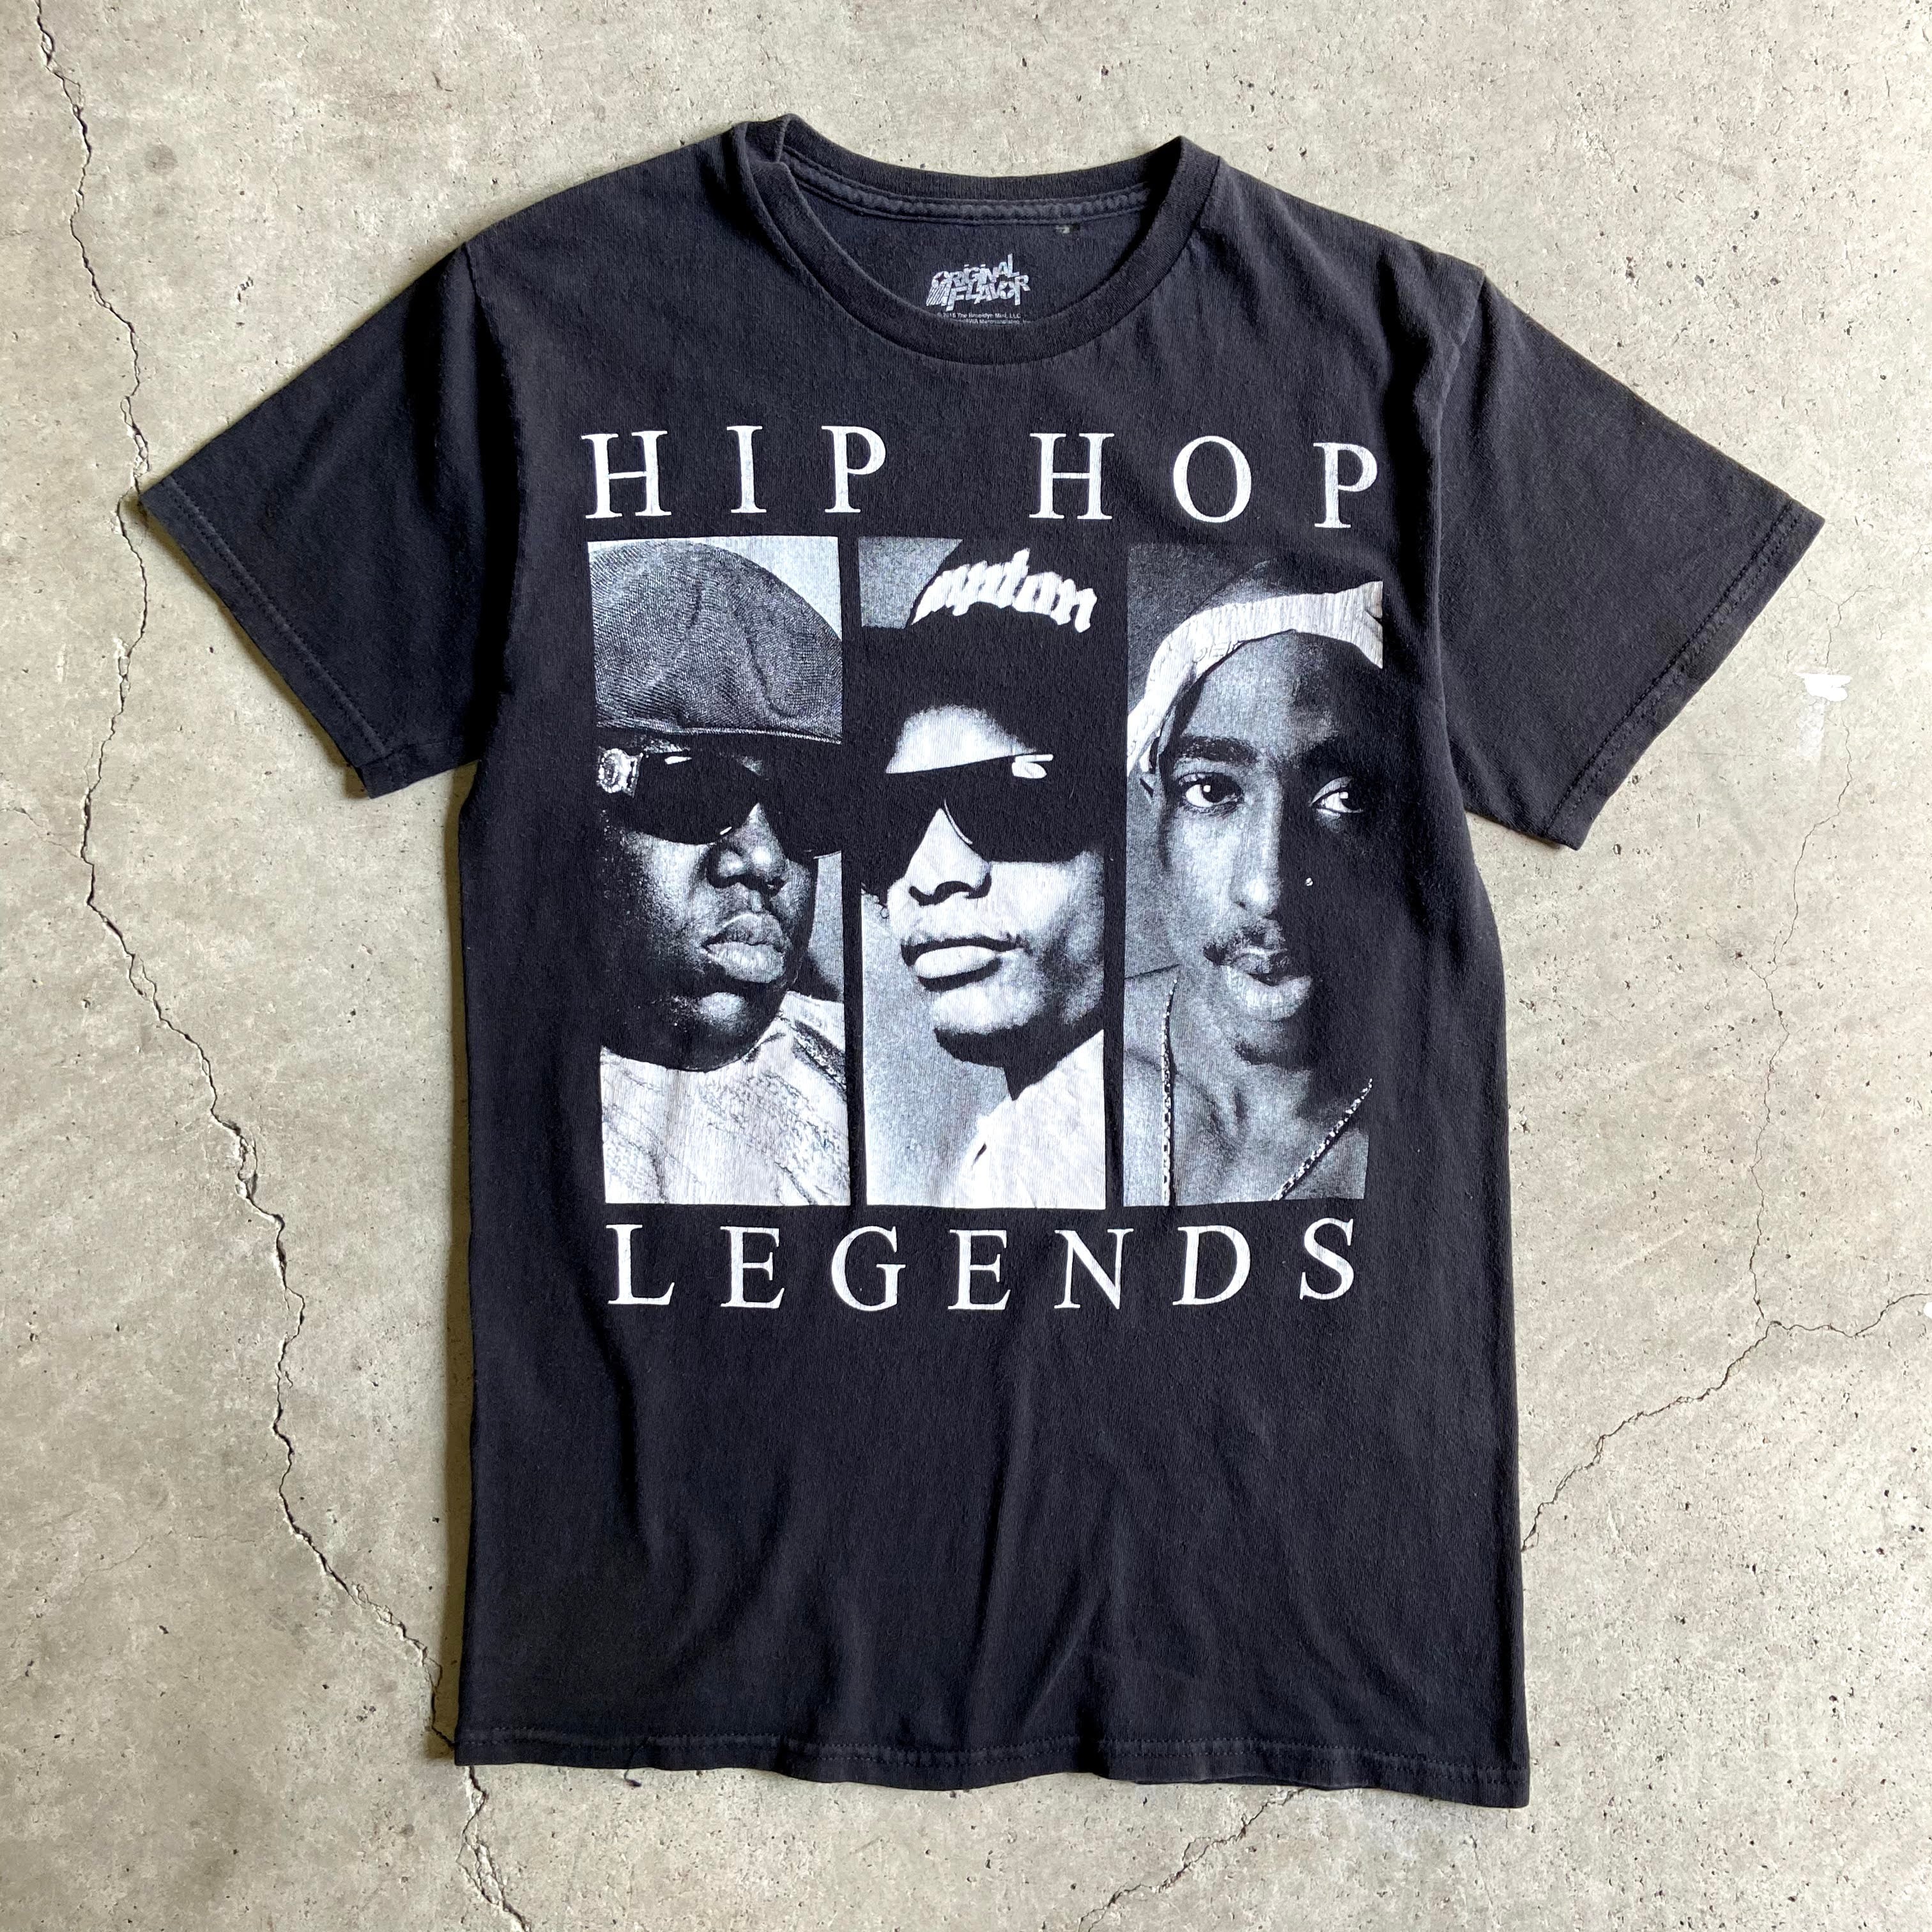 HIPHOP LEGENDS NOTORIOUS B.I.G EAZY-E 2PAC ノートリアス・B.I.G イージー・イー トゥーパック Tシャツ  メンズS 古着 黒 ブラック【Tシャツ】【CS2301-50】【PD20】【AN20】 | cave 古着屋【公式】古着通販サイト powered 